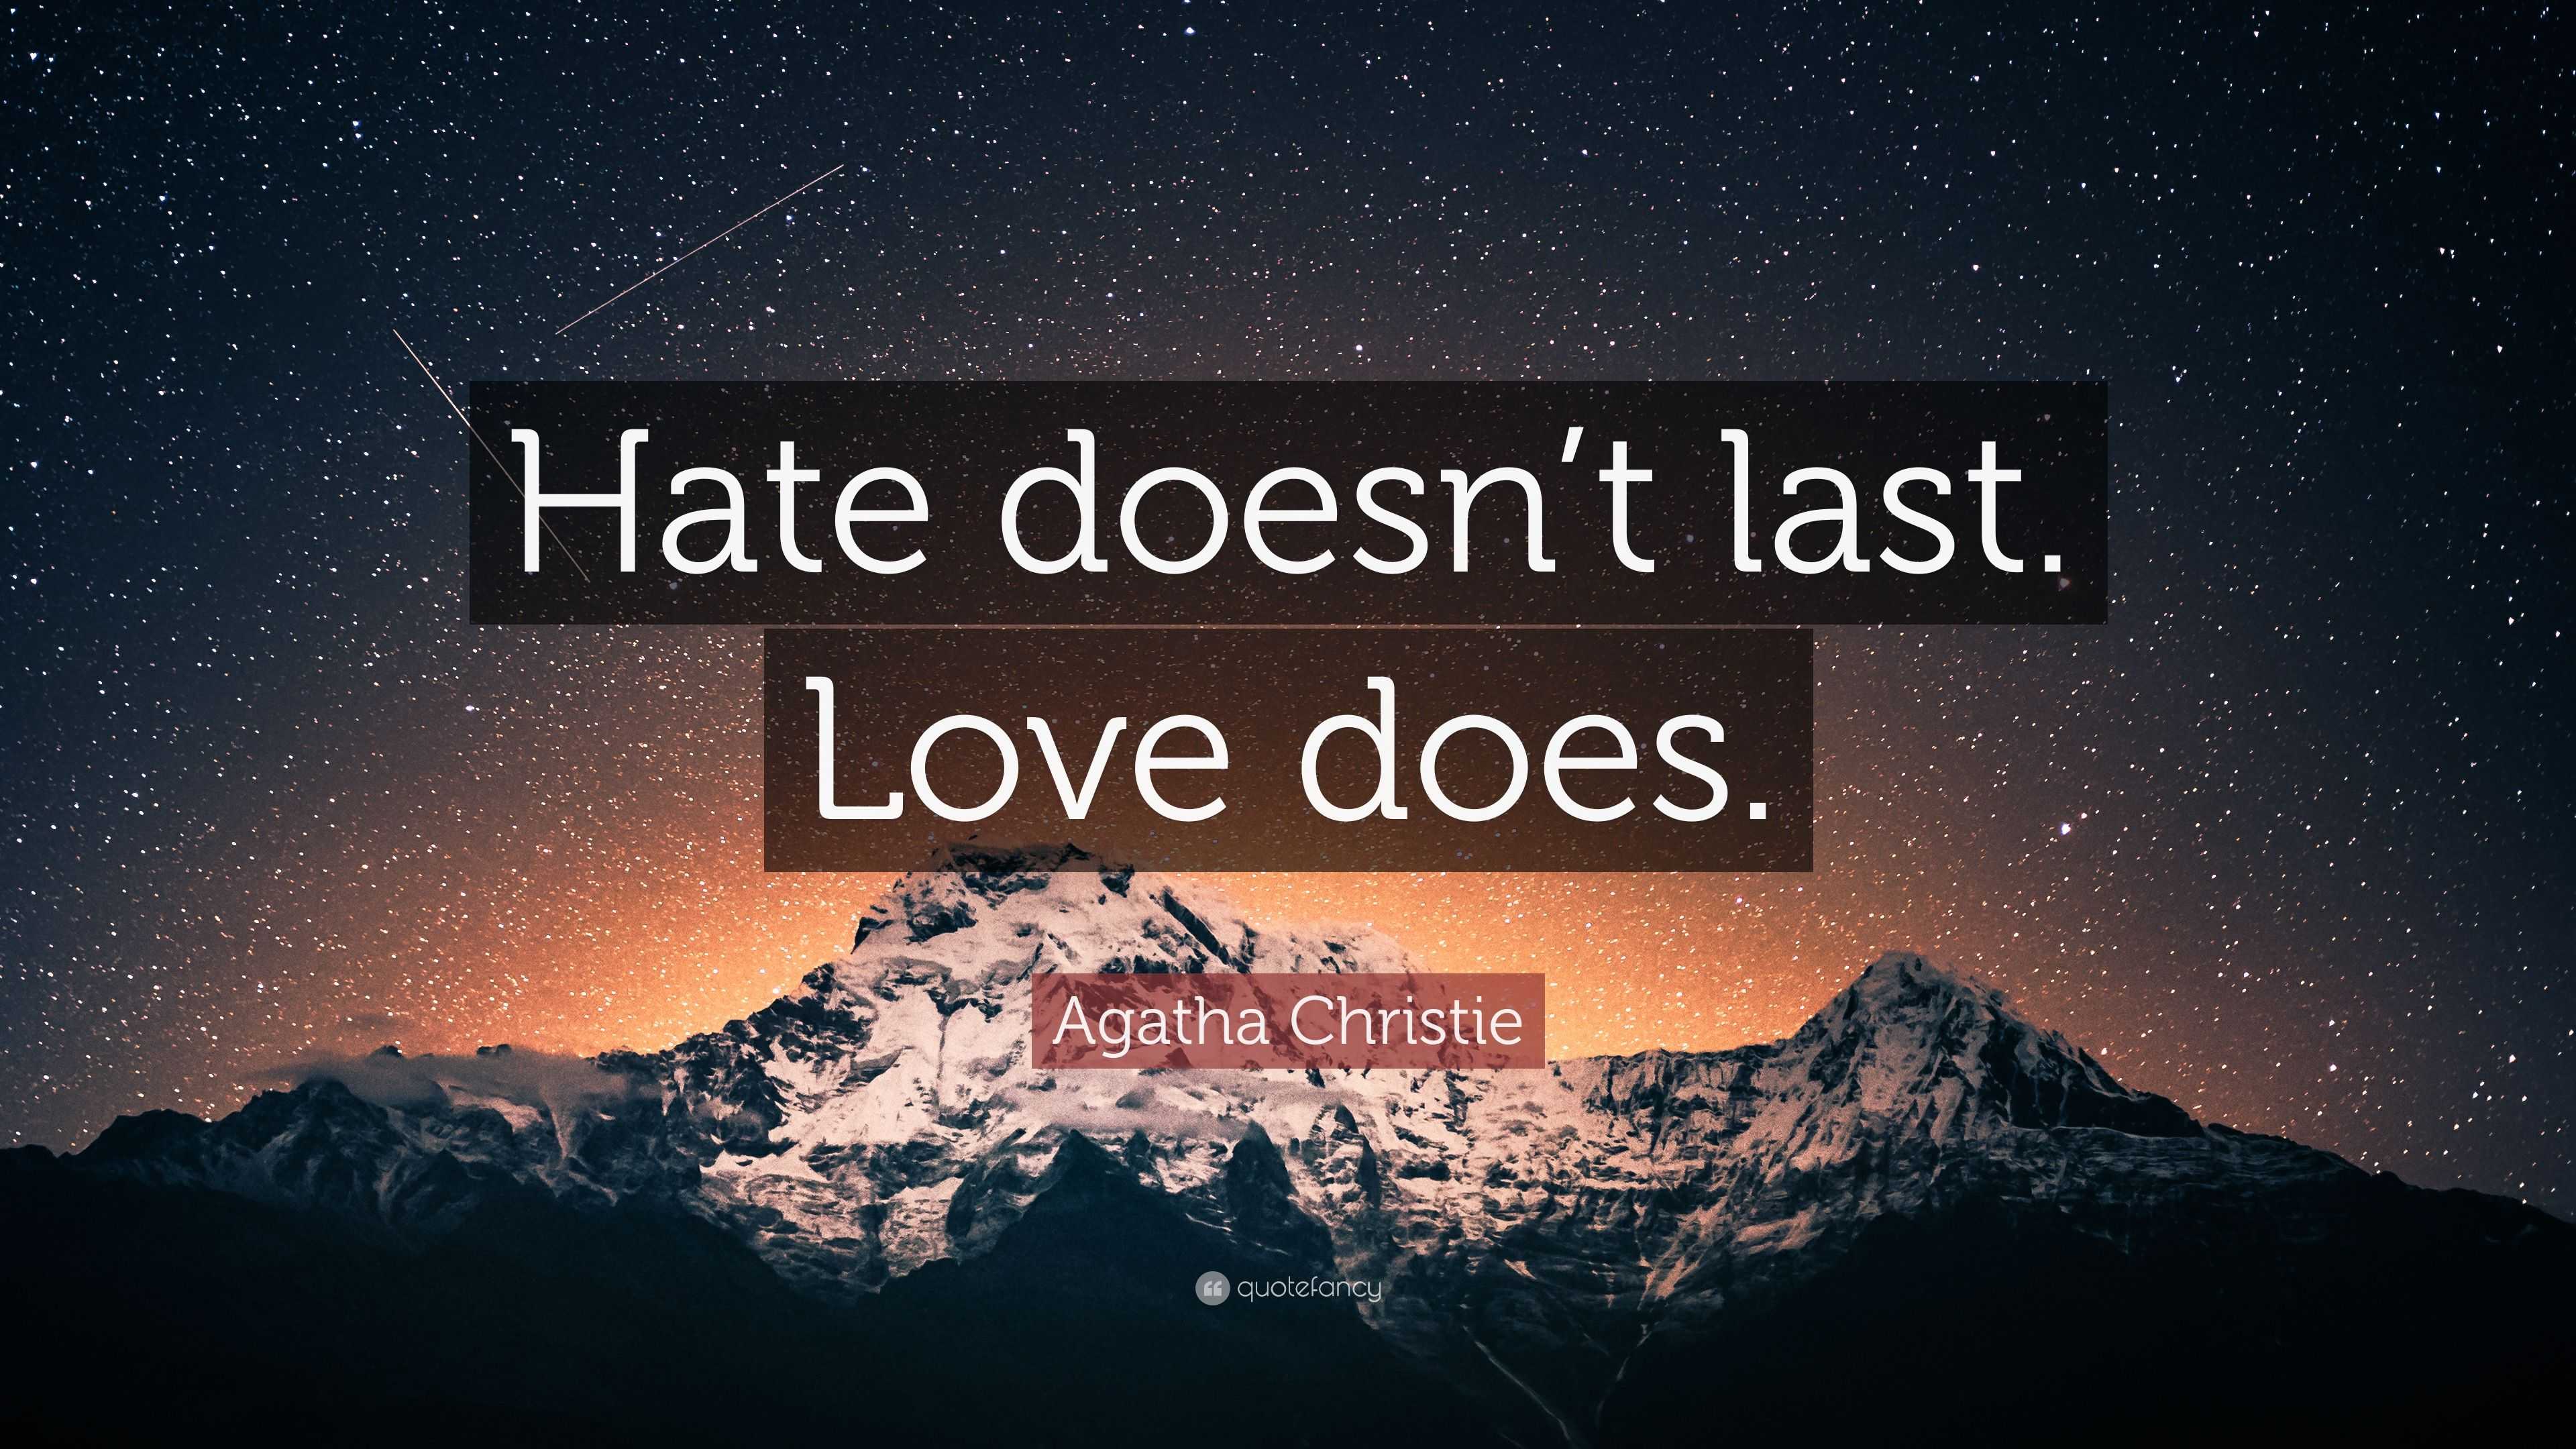 Agatha Christie Quote “Hate doesn t last Love does ”